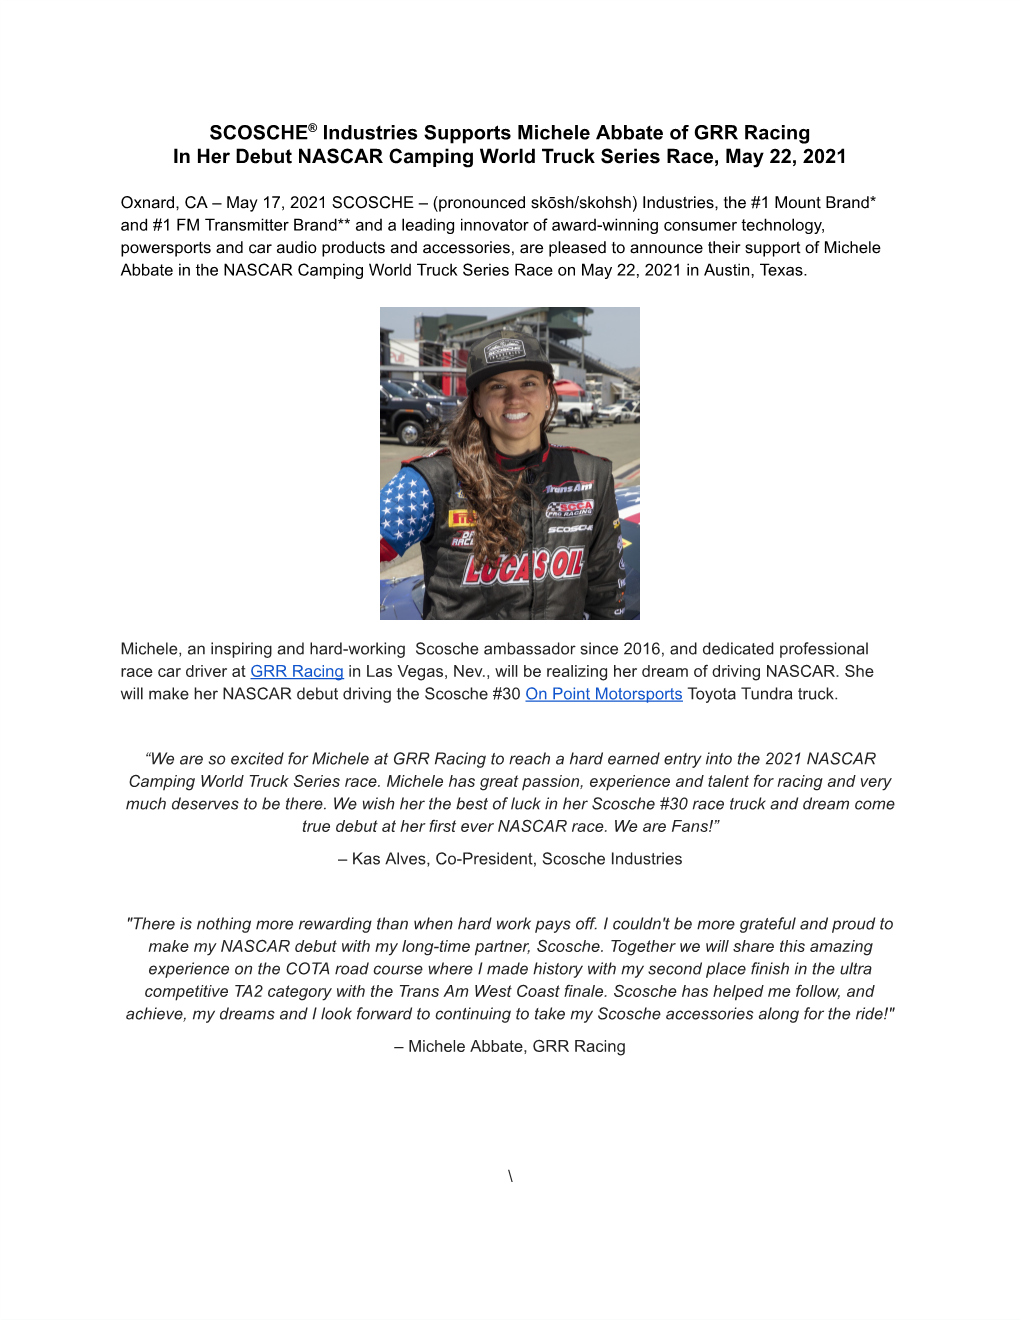 SCOSCHE® Industries Supports Michele Abbate of GRR Racing in Her Debut NASCAR Camping World Truck Series Race, May 22, 2021